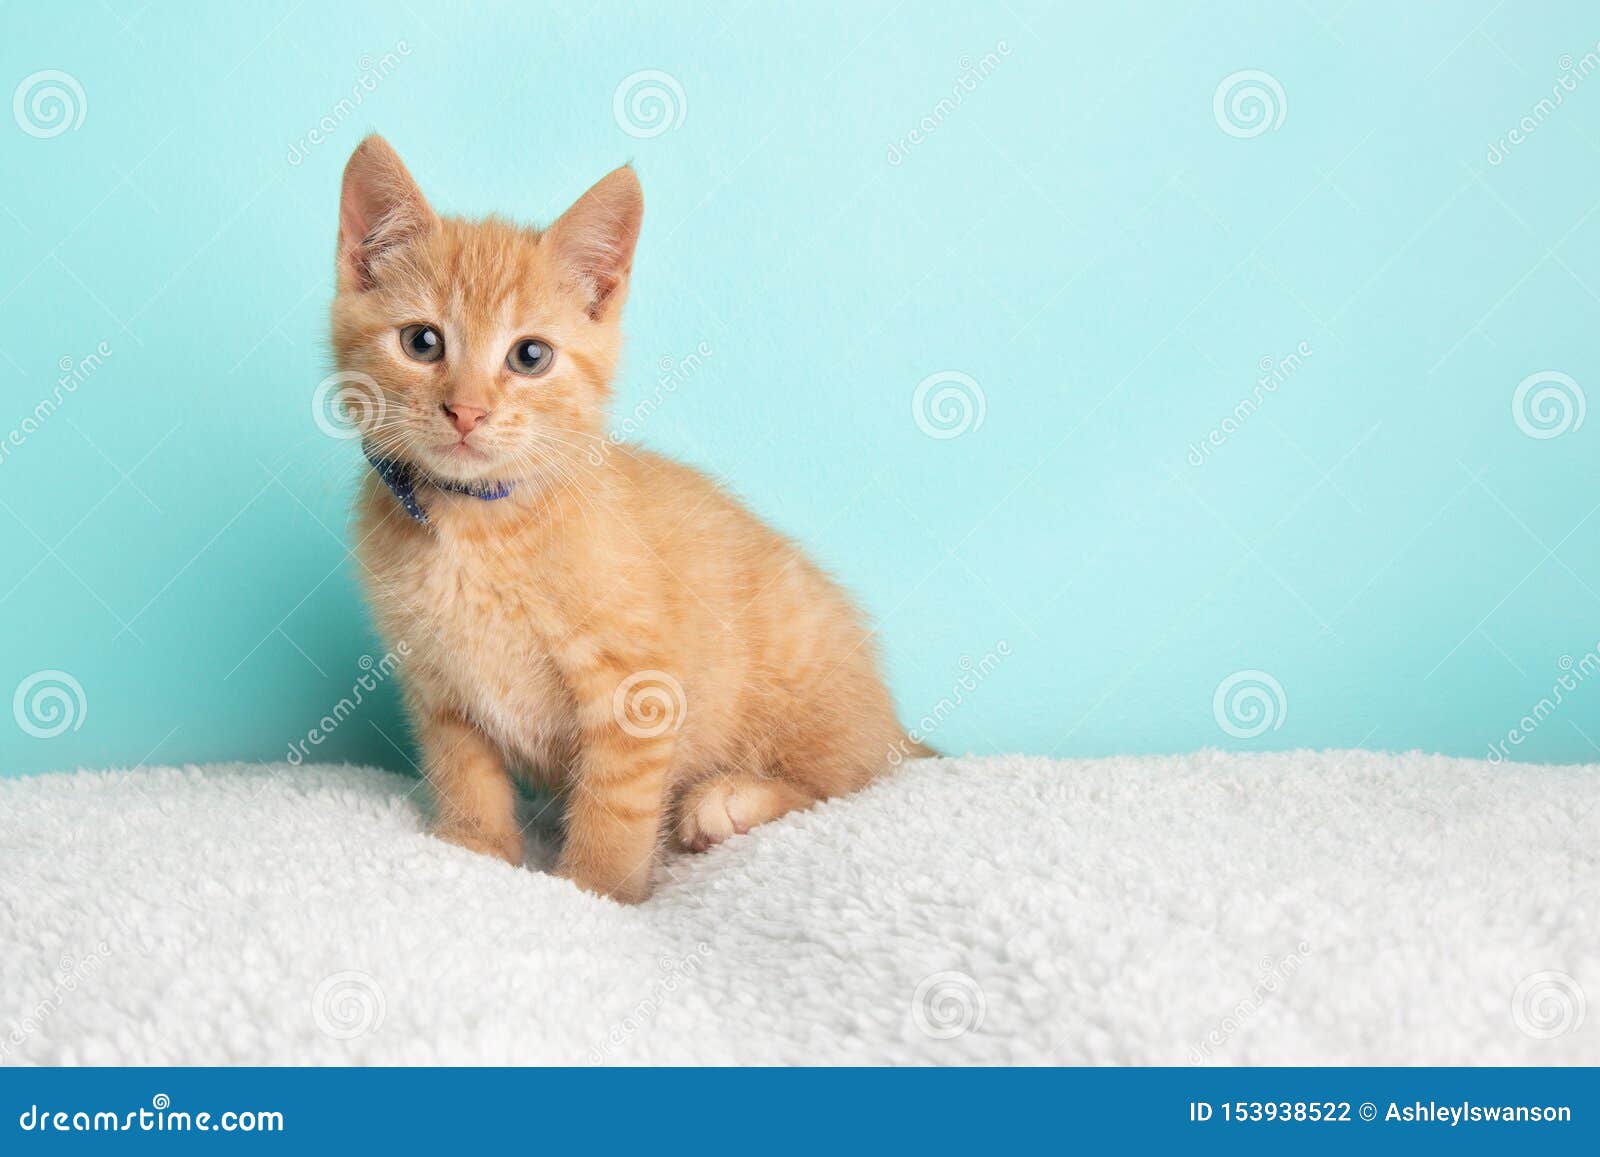 4 742 Kitten Rescue Photos Free Royalty Free Stock Photos From Dreamstime